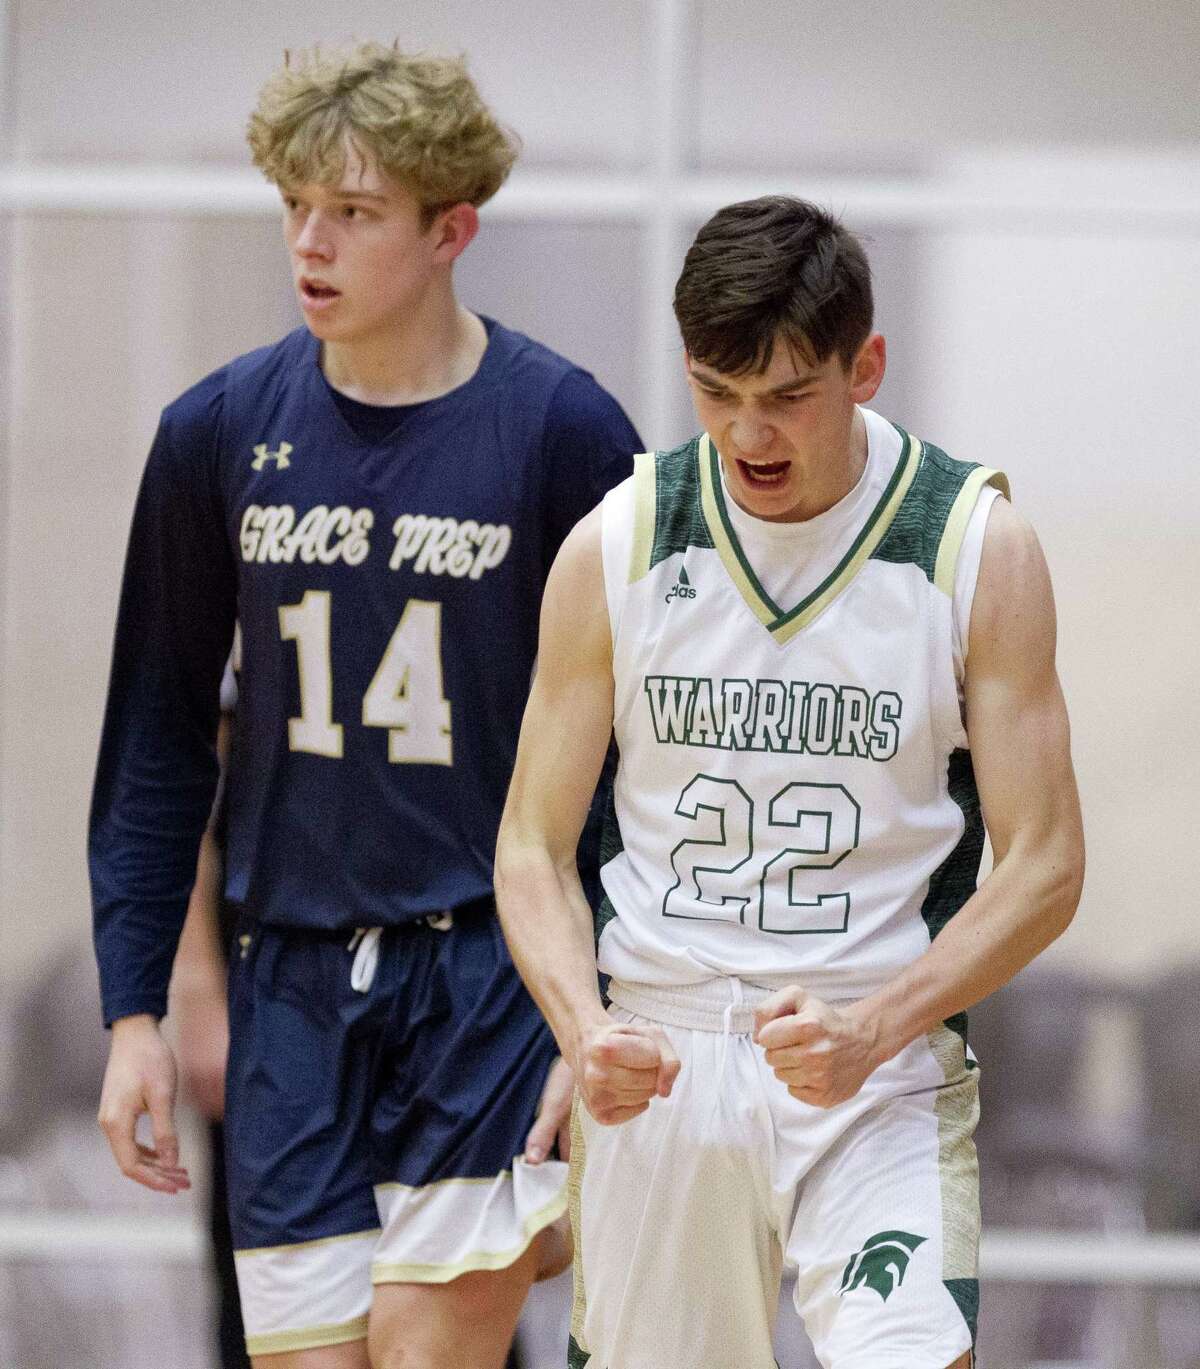 The Woodlands Christian Academy shooting guard Zack Golaszewski (22) reacts after a turnover by Arlington Grace Prep during the second quarter of the TAPPS 4A state championship game at West High School, Friday, March 1, 2019, in West.